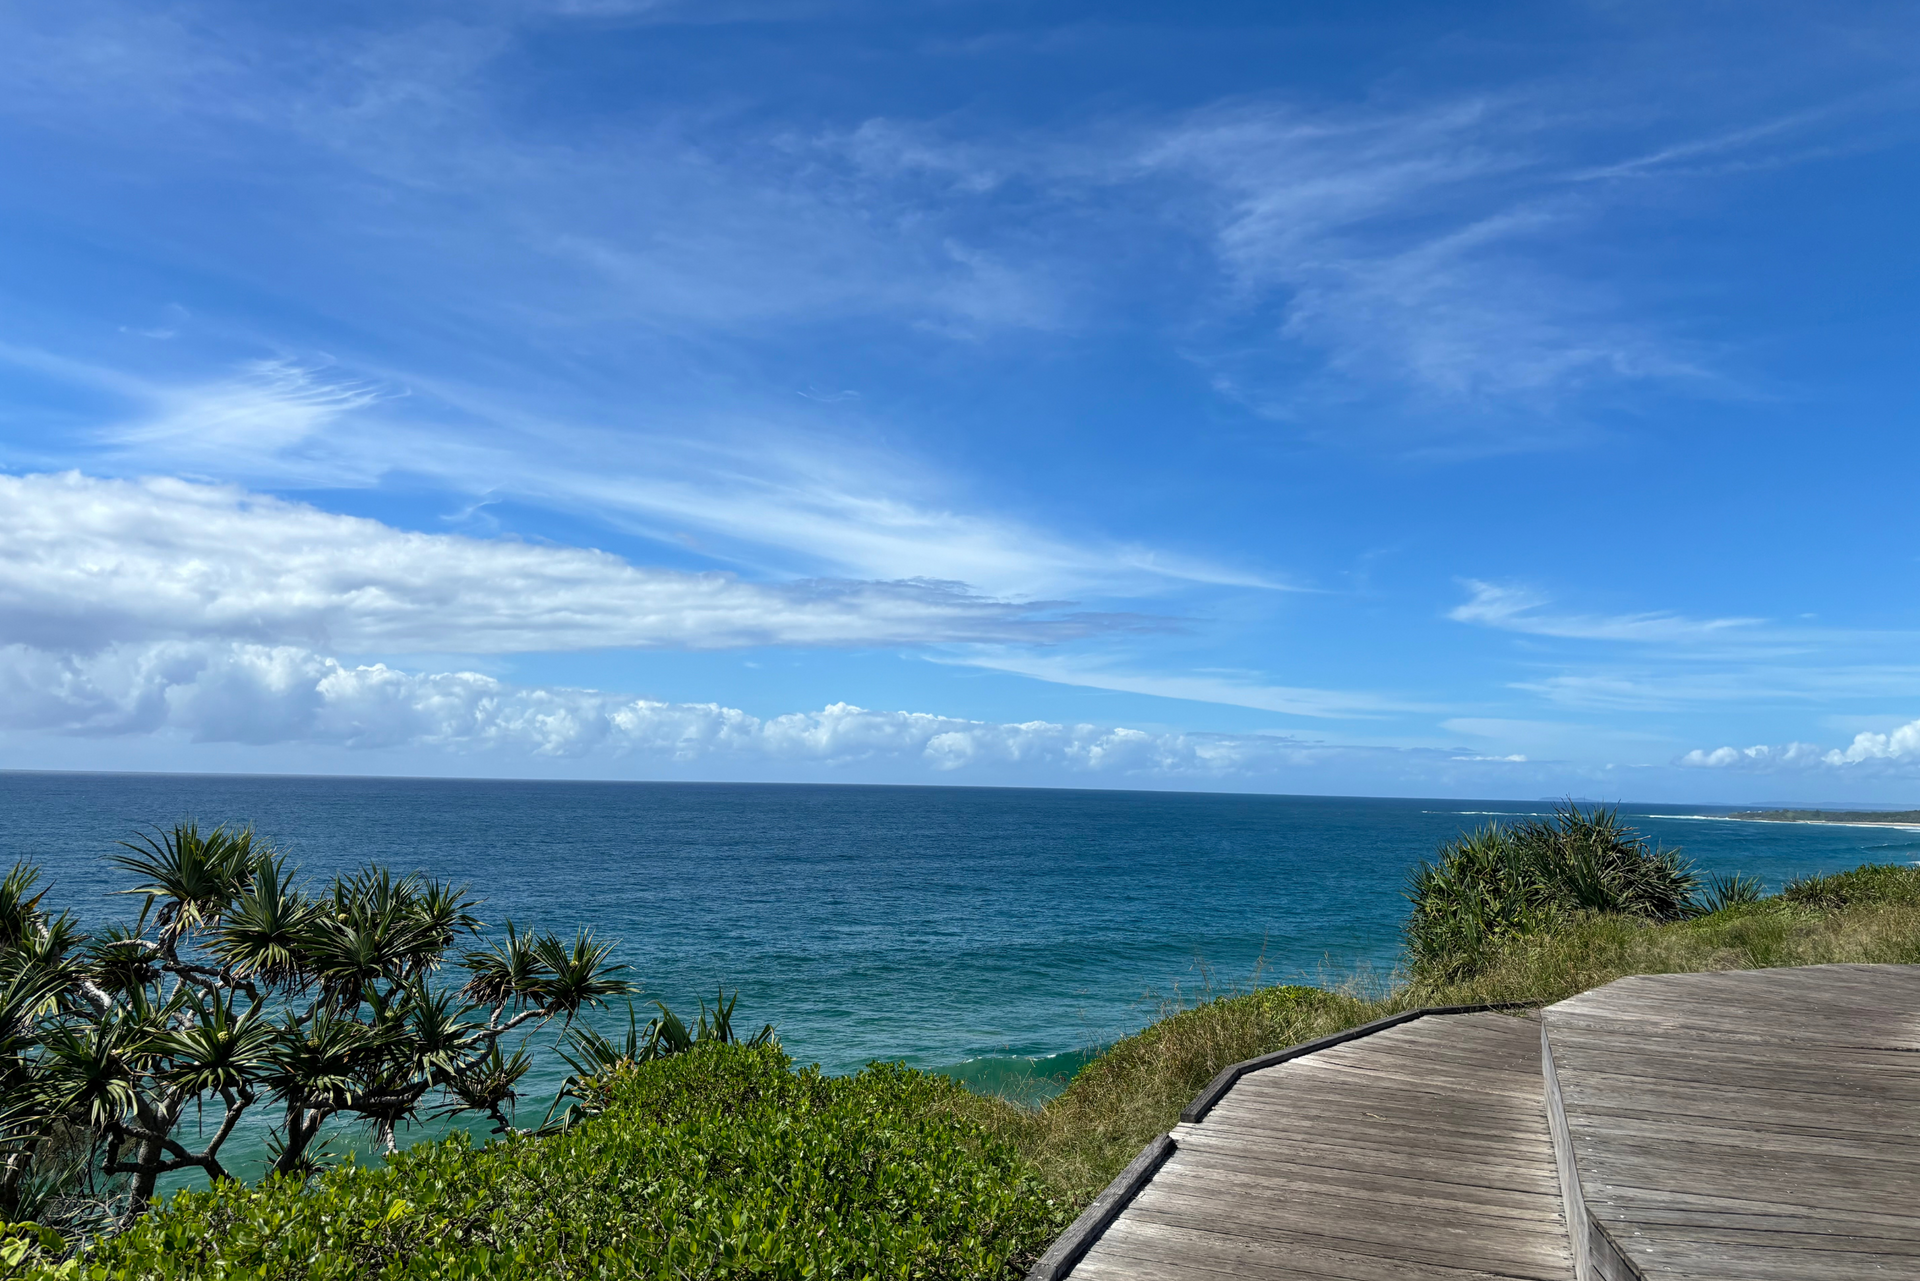 A wooden walkway leading to the ocean on a sunny day.